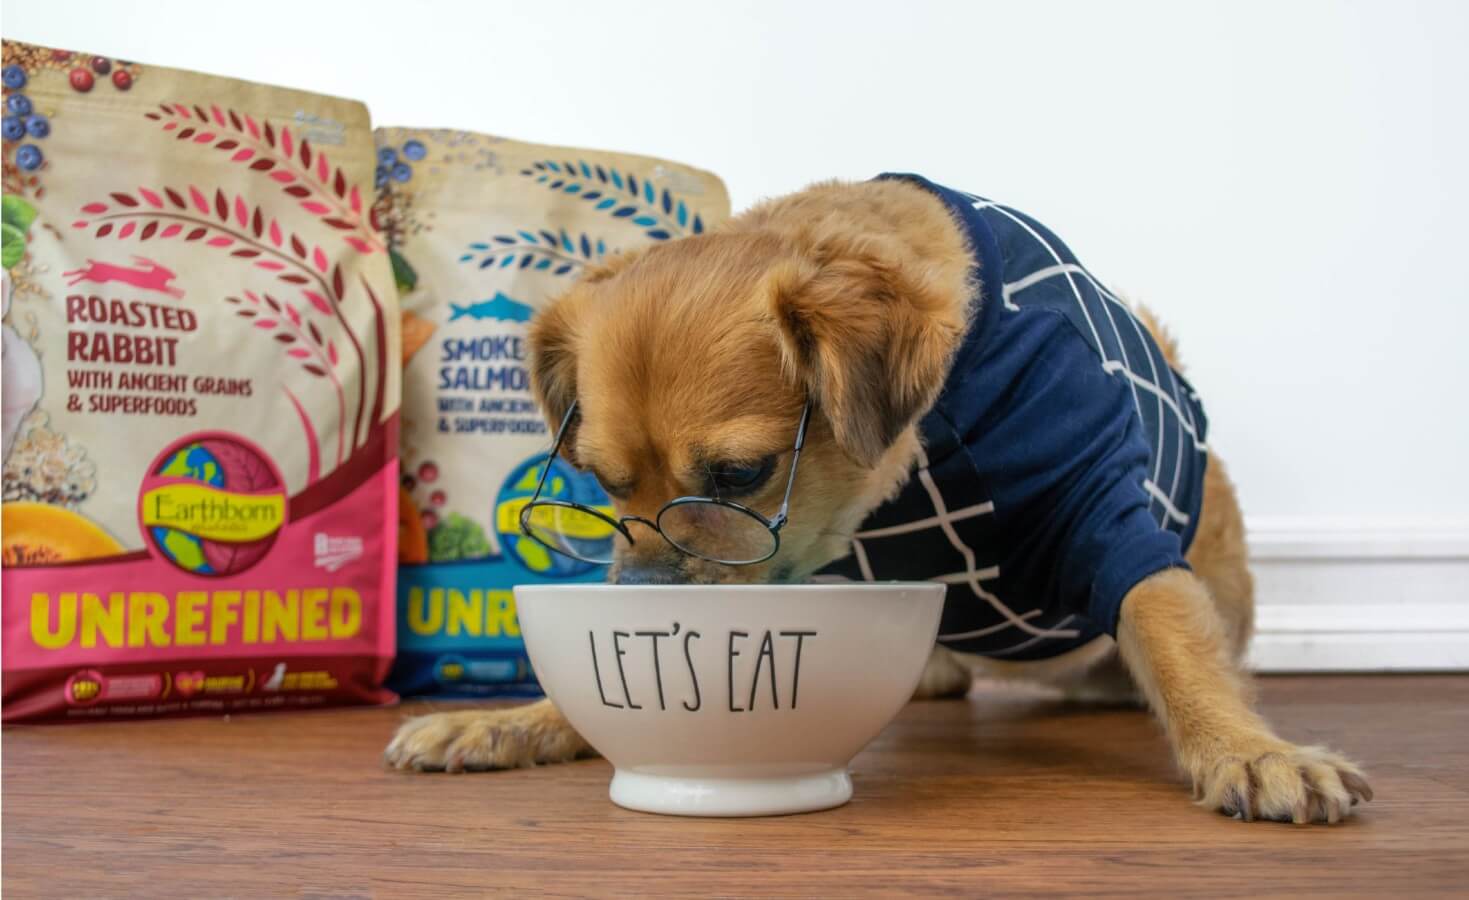 A dog eats out of a dog bowl that says "Let's Eat" on the side